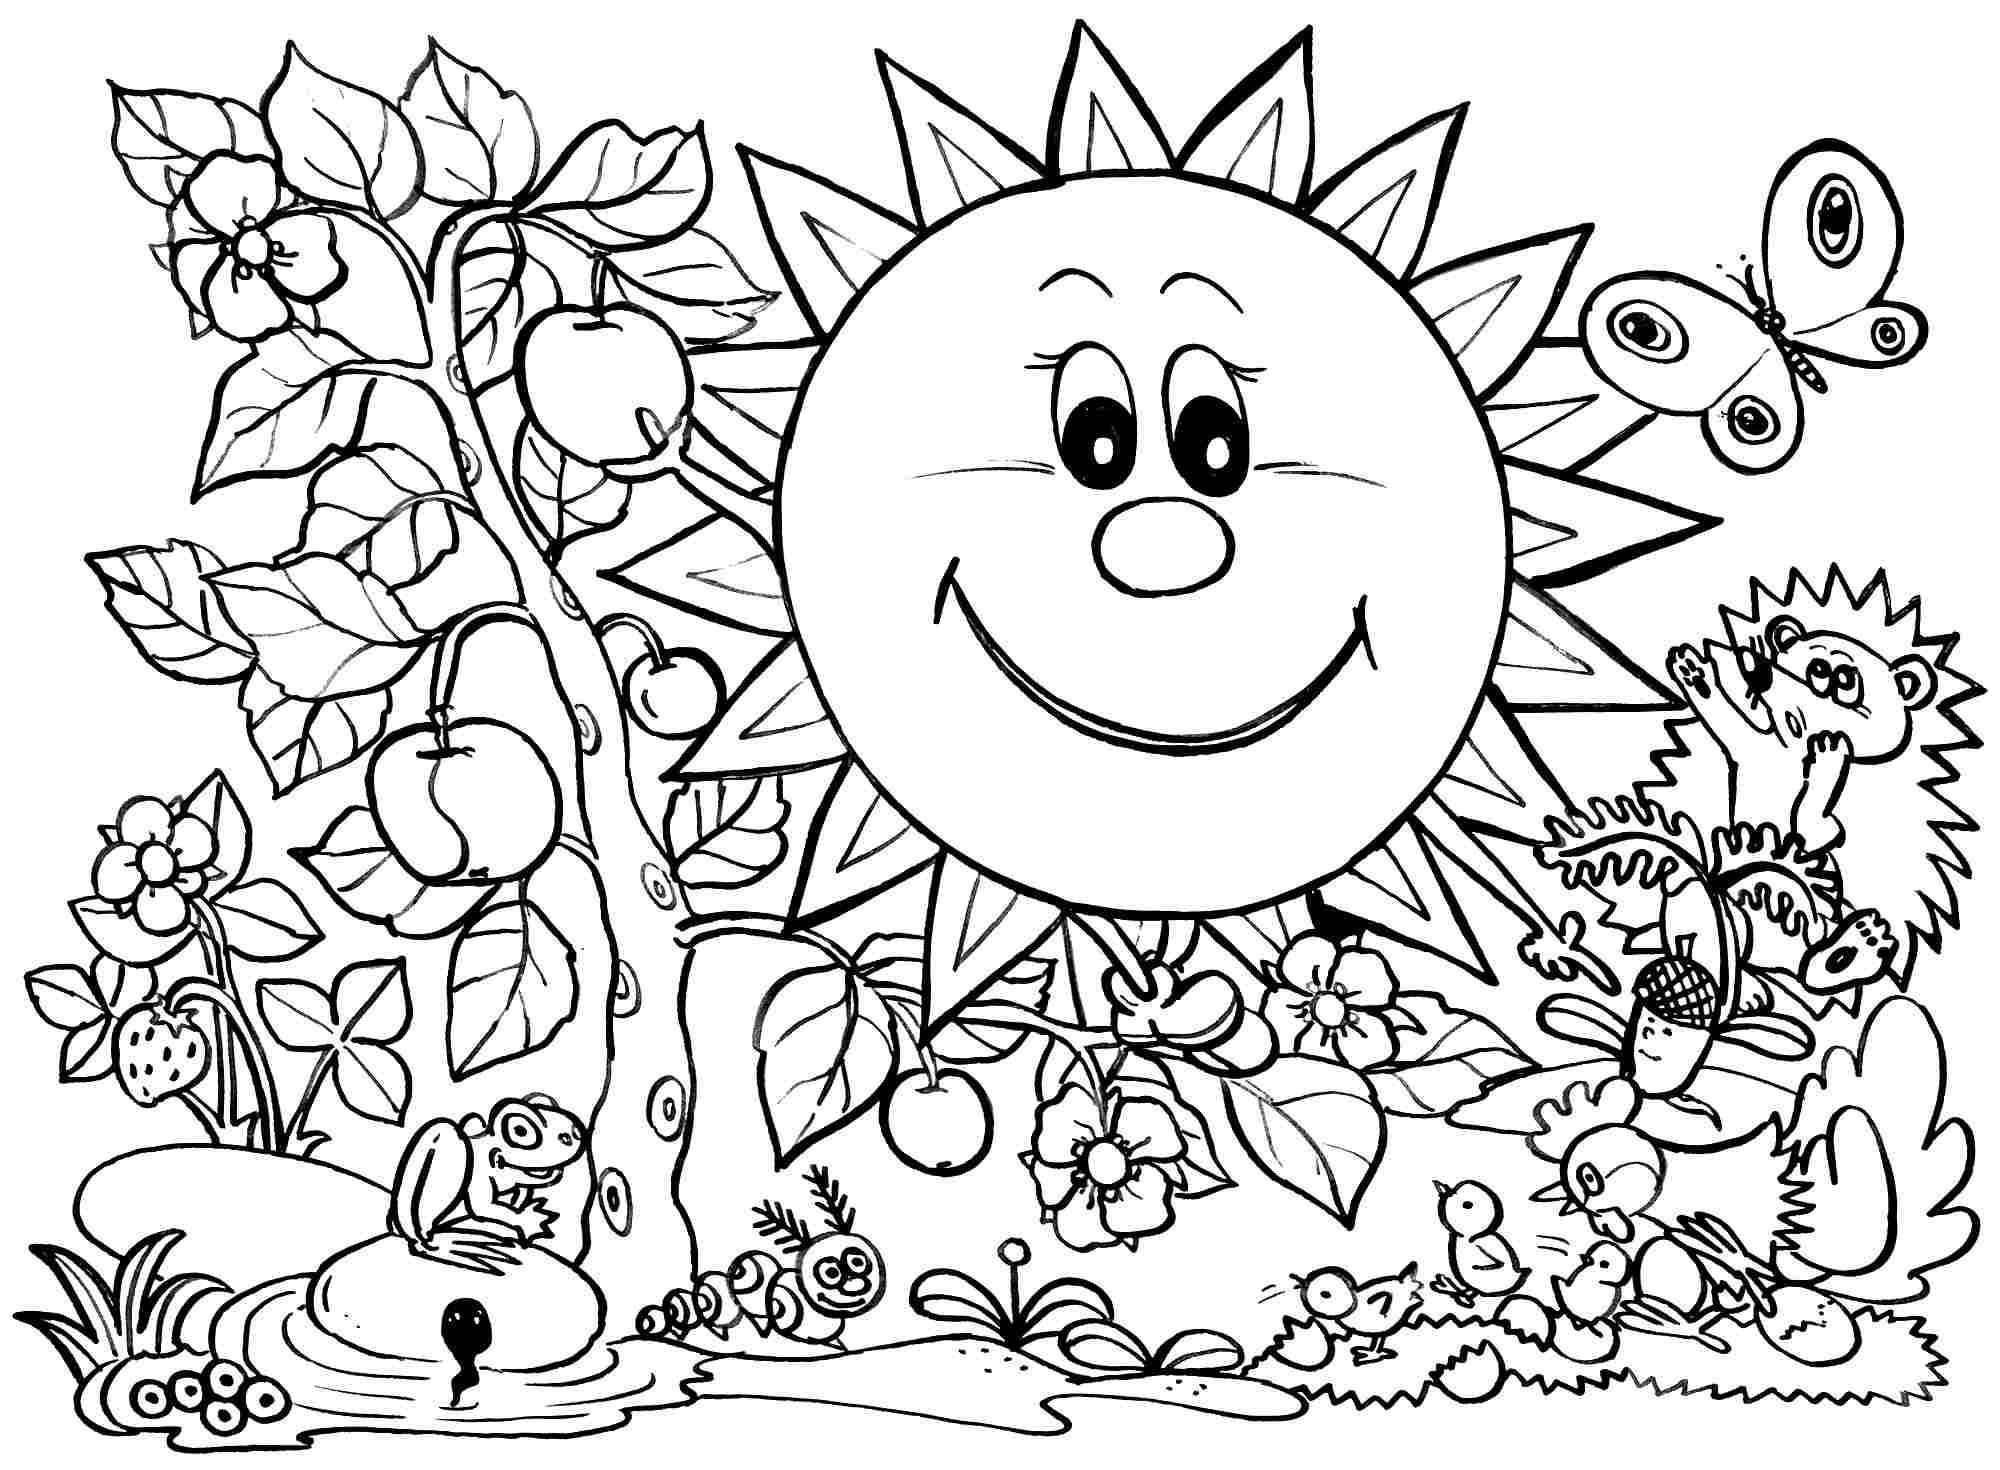 Free Coloring Pages Free For Kids Spring Time Download Free Coloring Pages Free For Kids Spring 